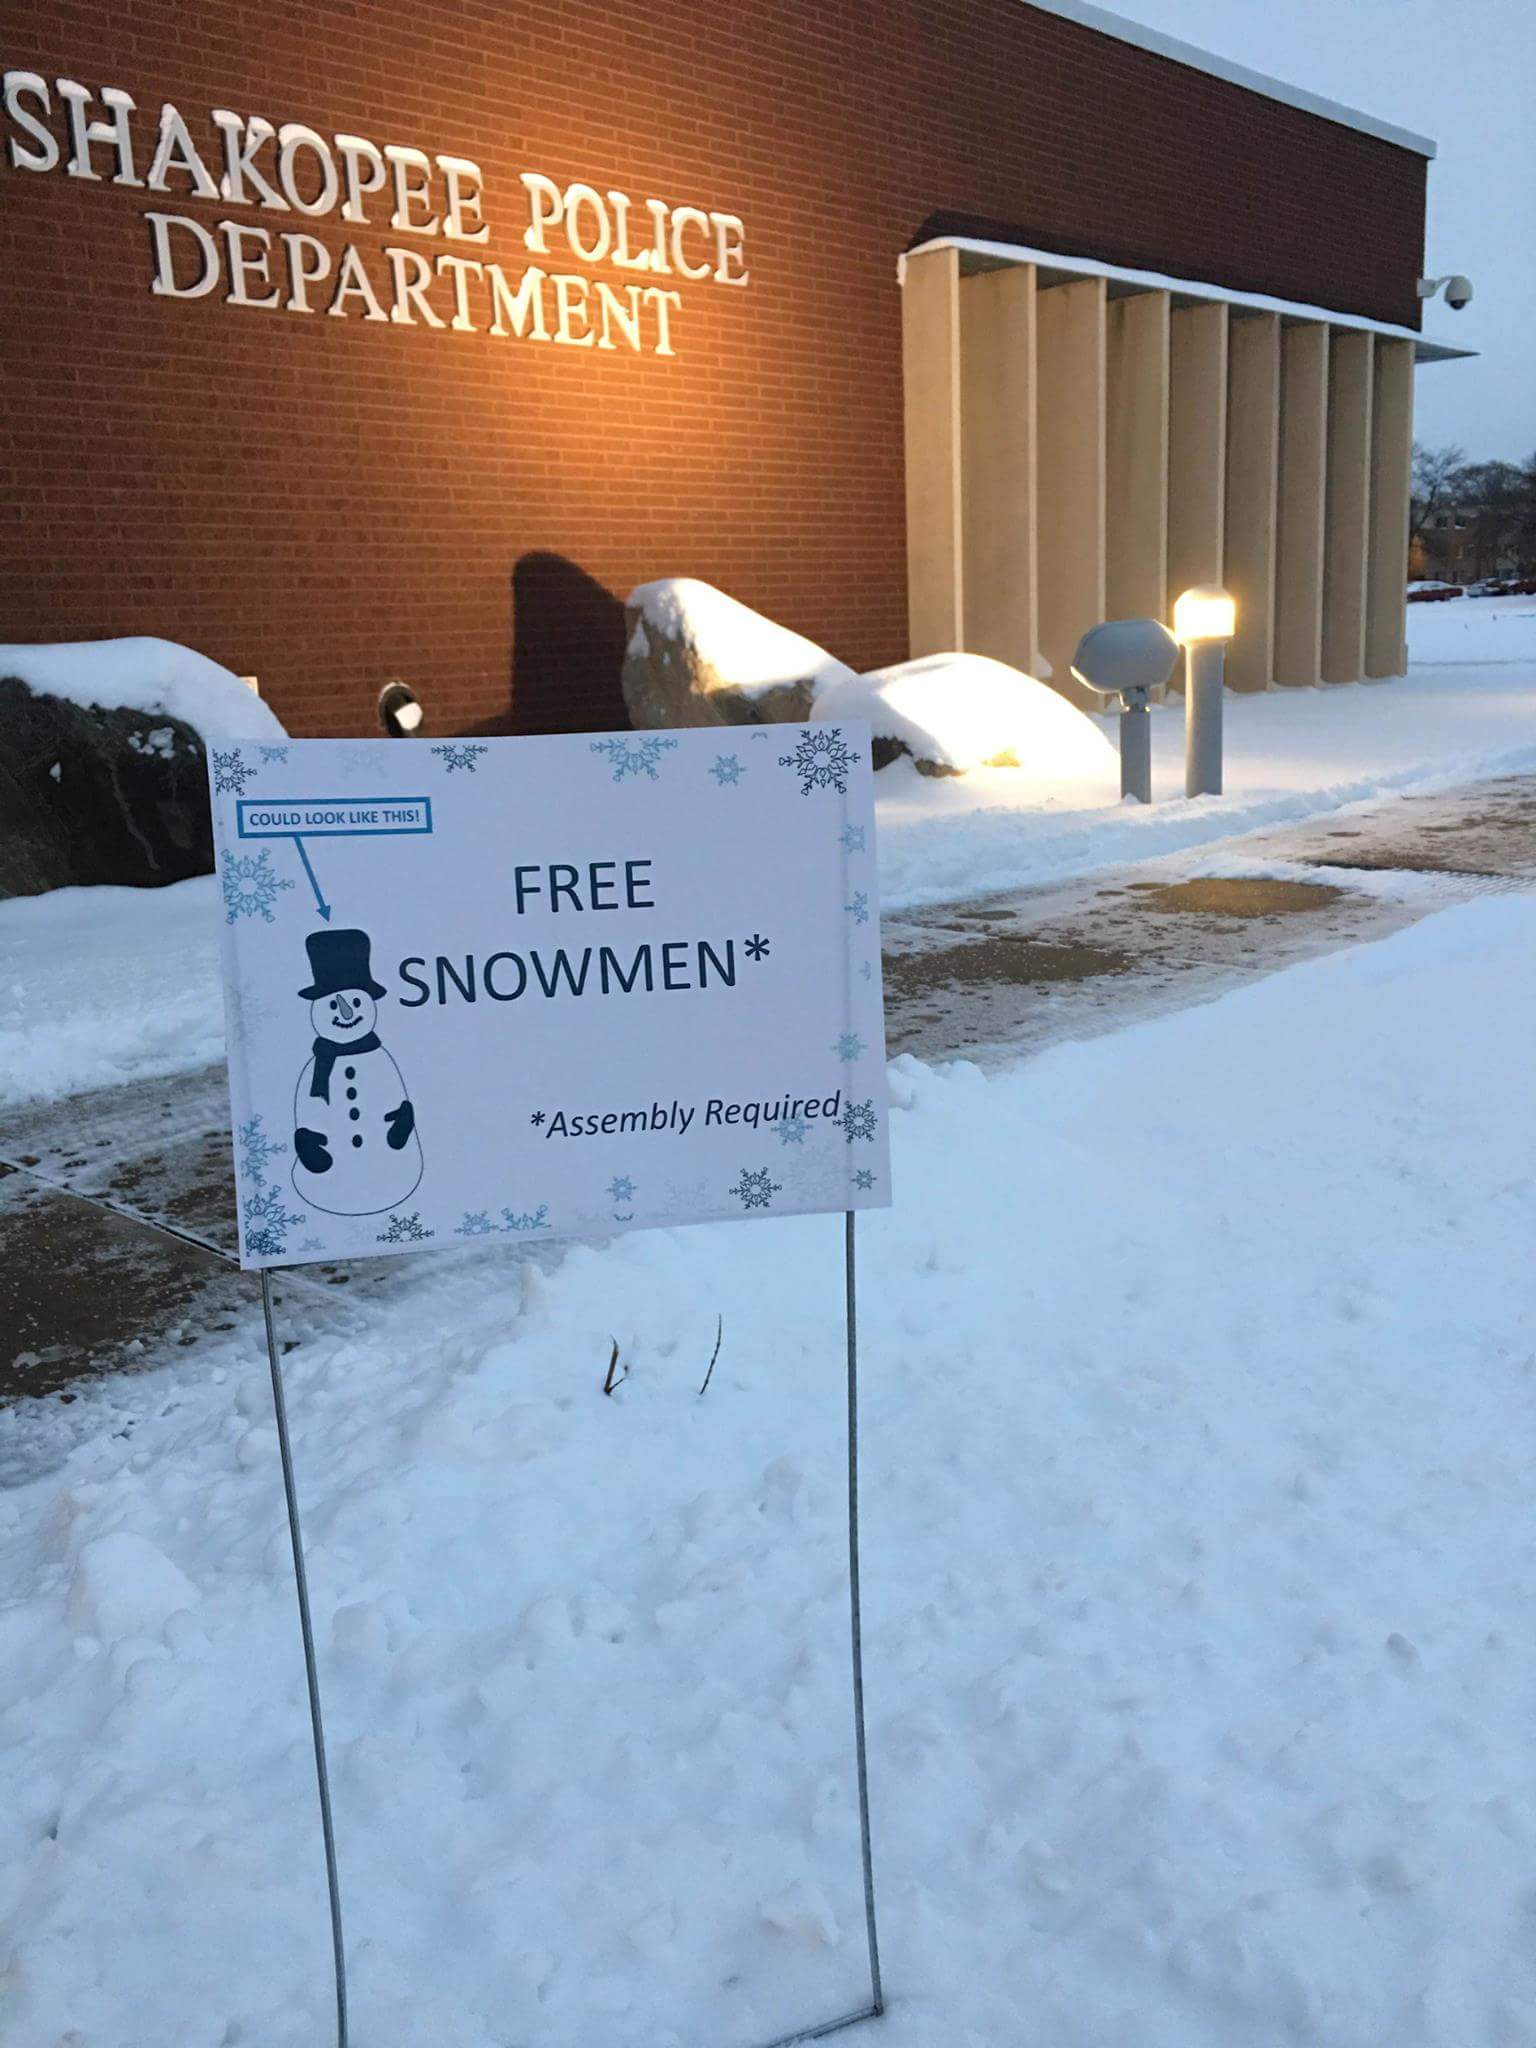 snow - Shakopee Police Department Could Look This! Free Snowmen Assembly Required